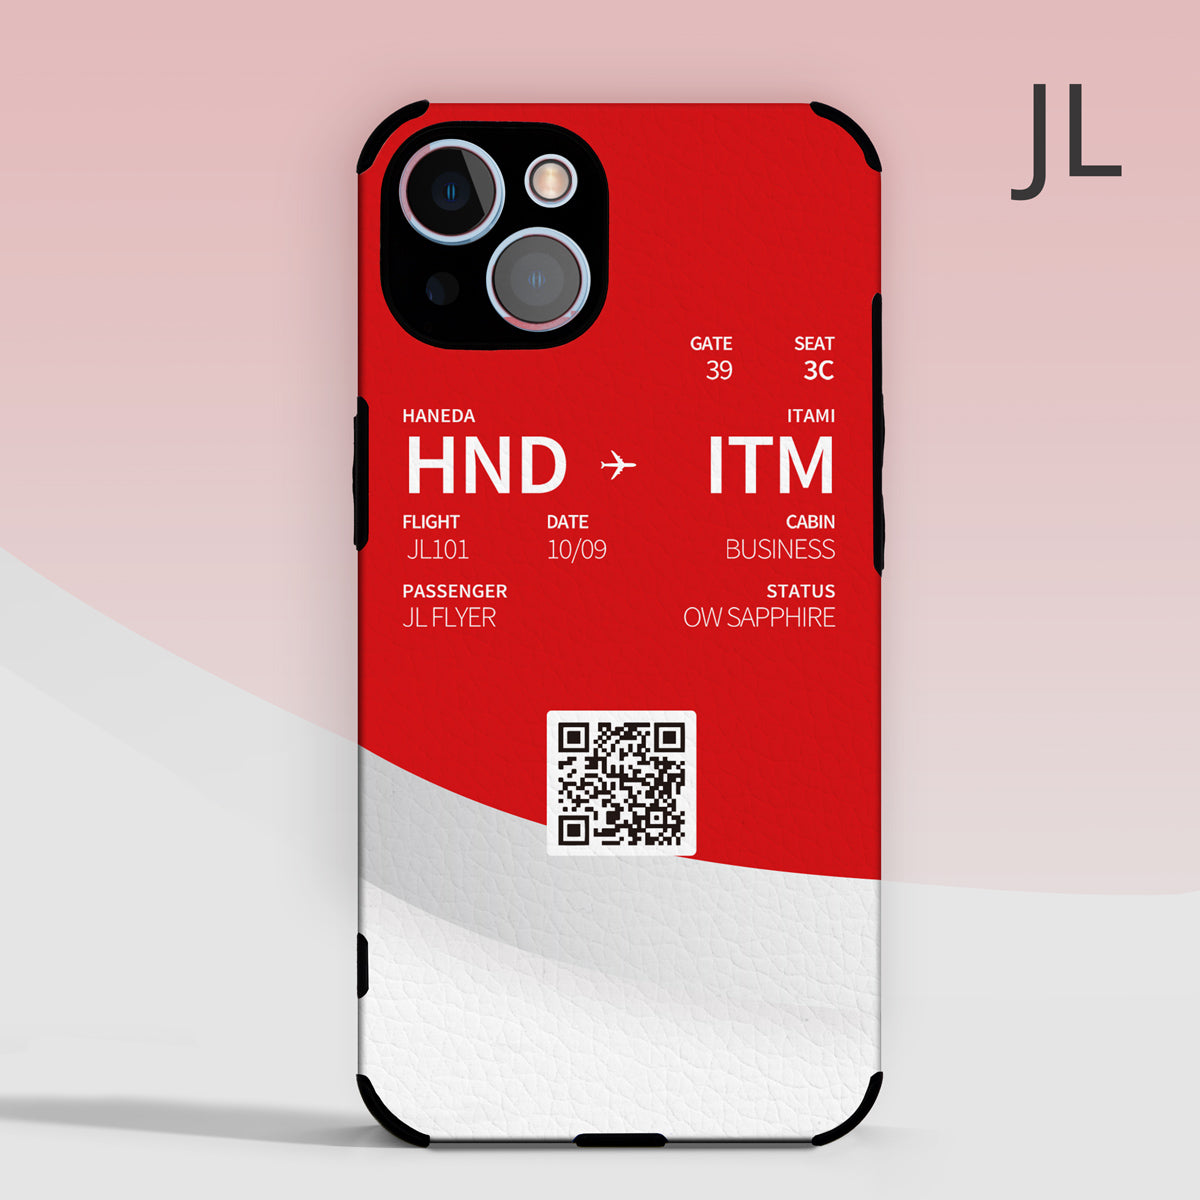 Japan Airlines JL color Boarding Pass Phone Case design perfect for aviation geeks crew pilot apple iphone huawei samsung xiaomi